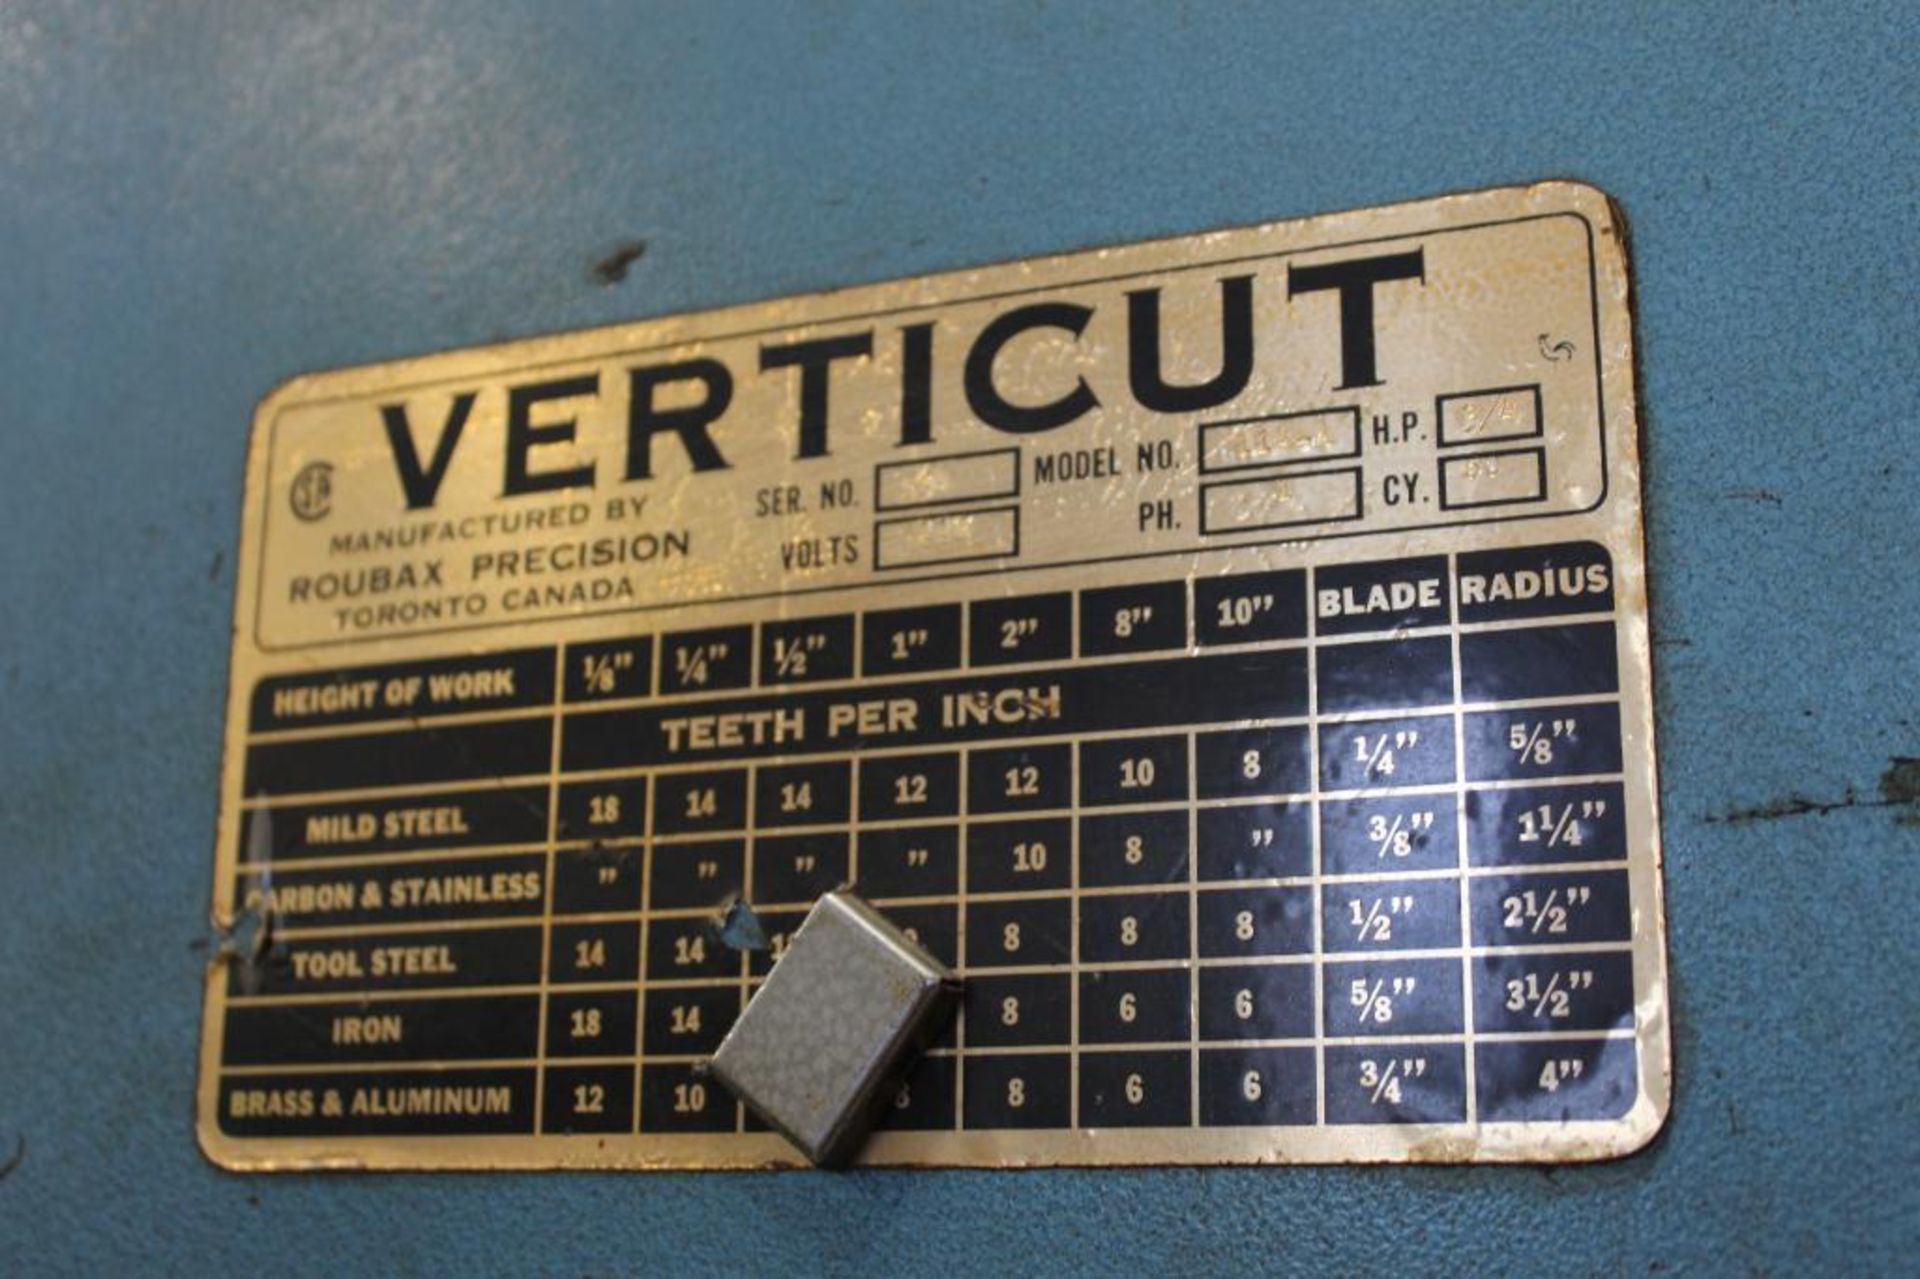 Verticut Model 114-A Vertical Band Saw on rolling base - Image 5 of 6